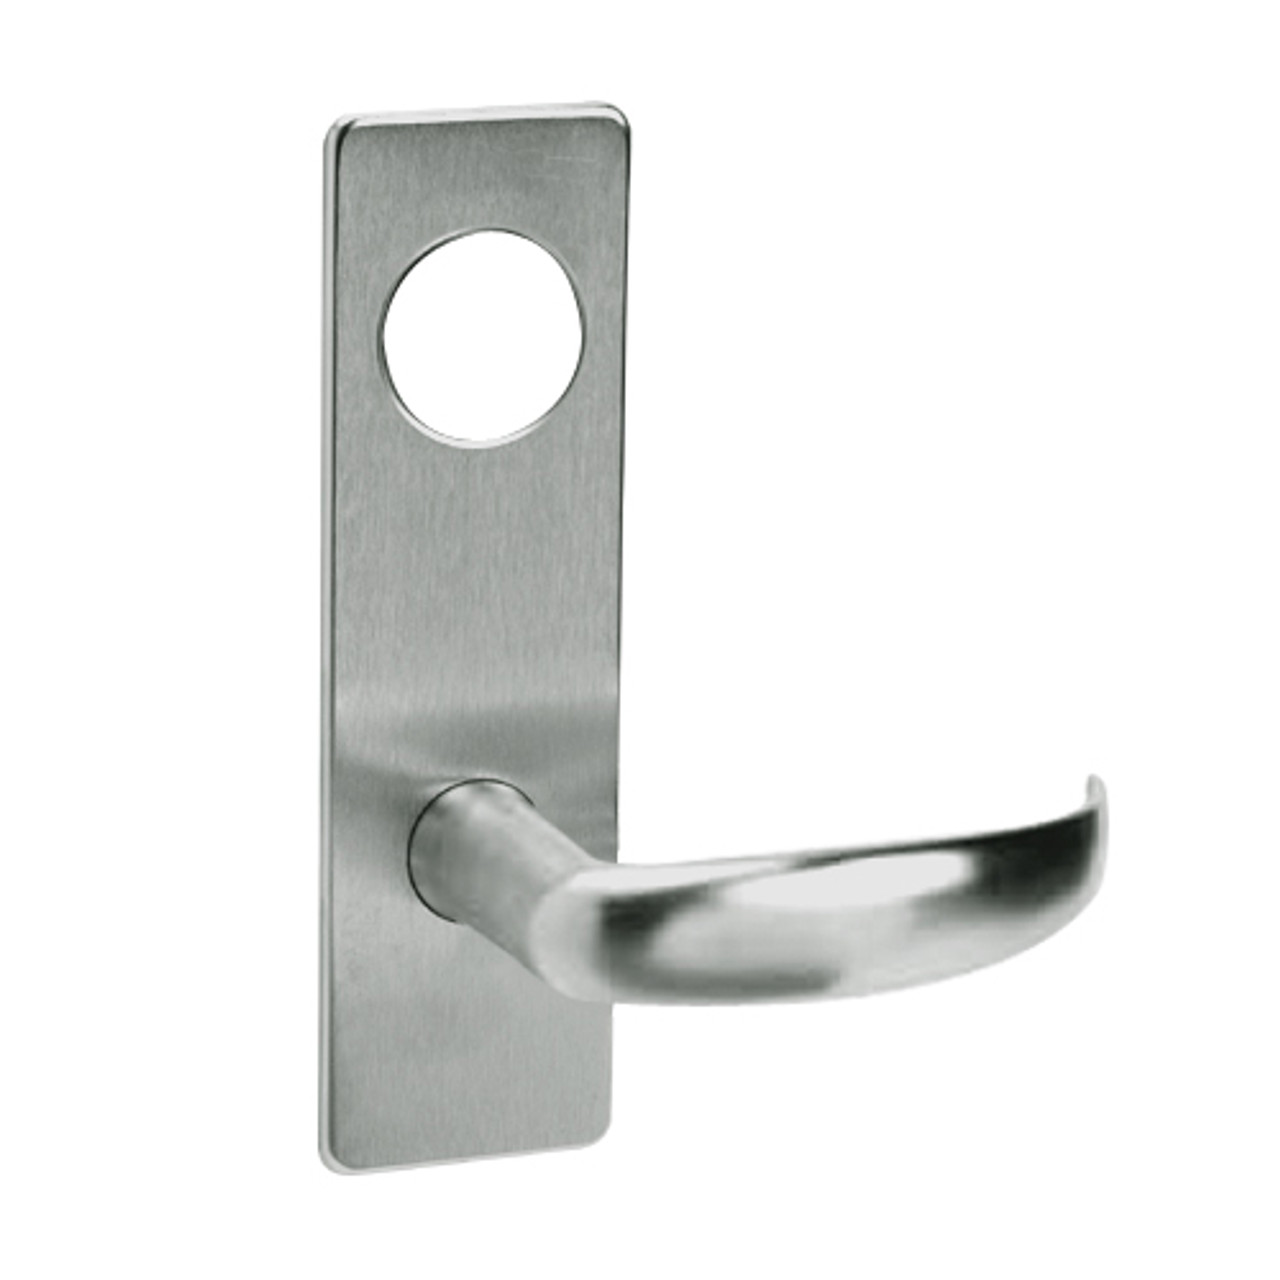 ML2053-PSP-619-LC Corbin Russwin ML2000 Series Mortise Entrance Locksets with Princeton Lever in Satin Nickel